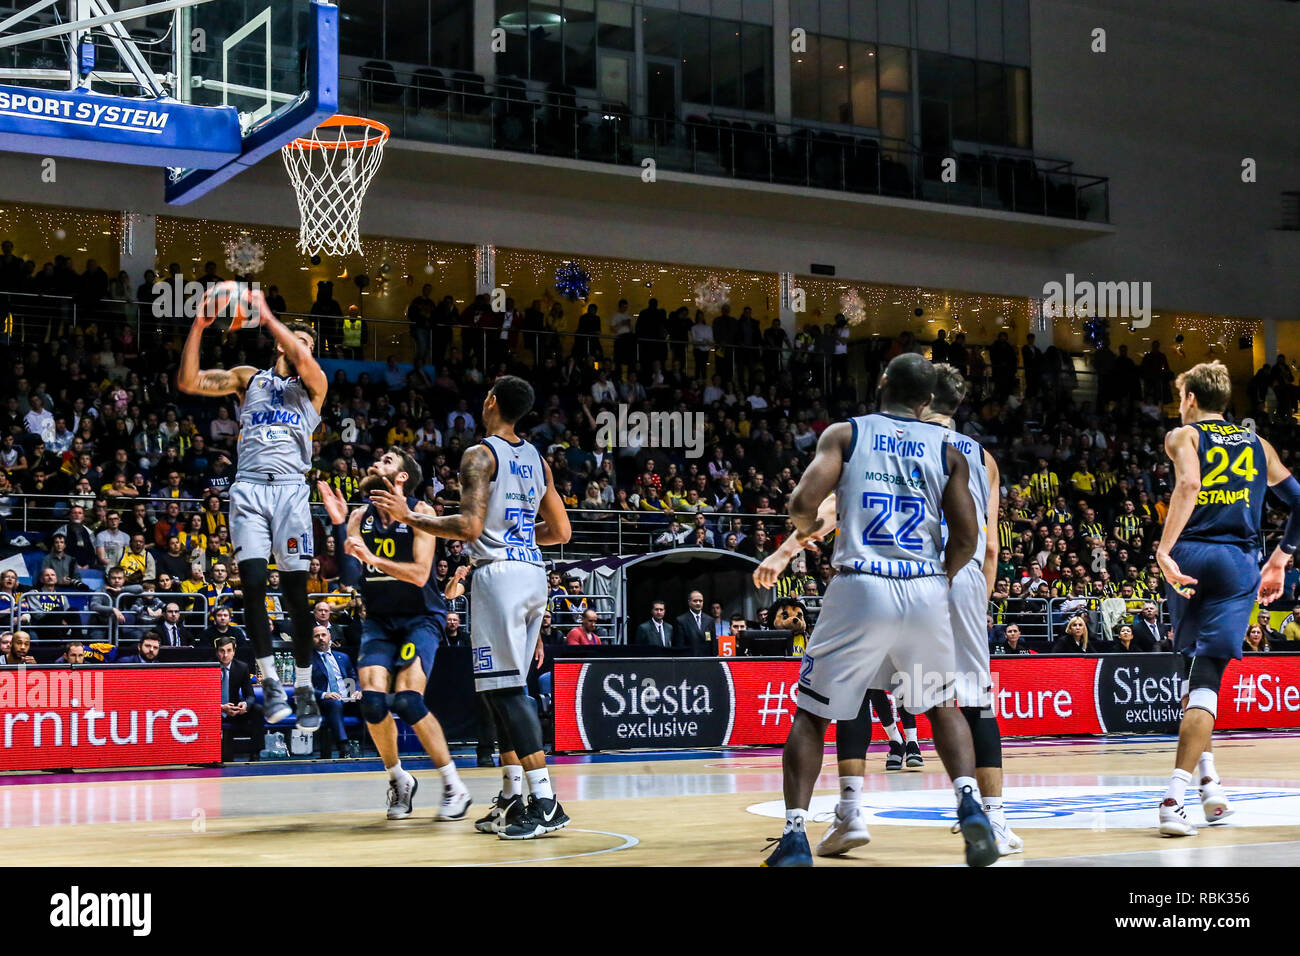 Anthony Gill, of Khimki Moscow seen in action against Fenerbahce Istanbul in Round 17 of the Turkish Airlines Euroleague  game of the 2018-2019 season. Khimki Moscow beat Fenerbahce Istanbul in overtime, 84-78. Stock Photo